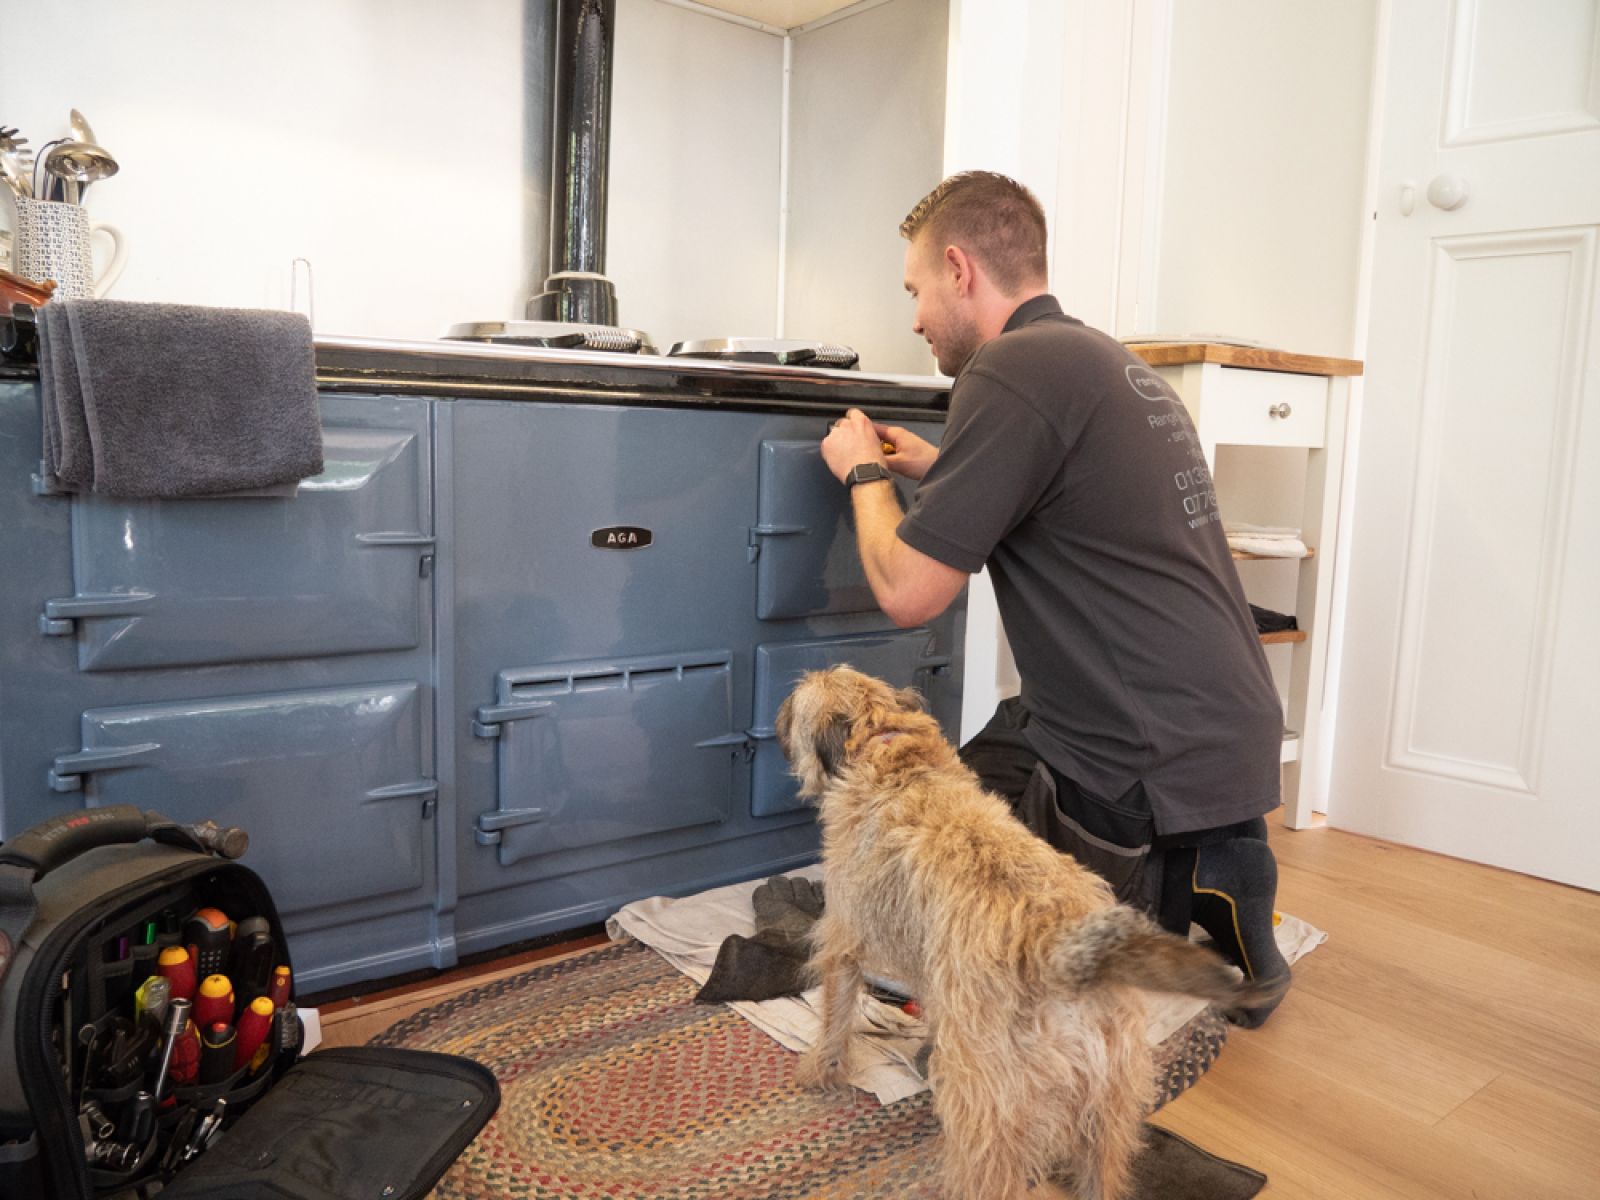 Range Experts servicing an Aga with the customer's dog